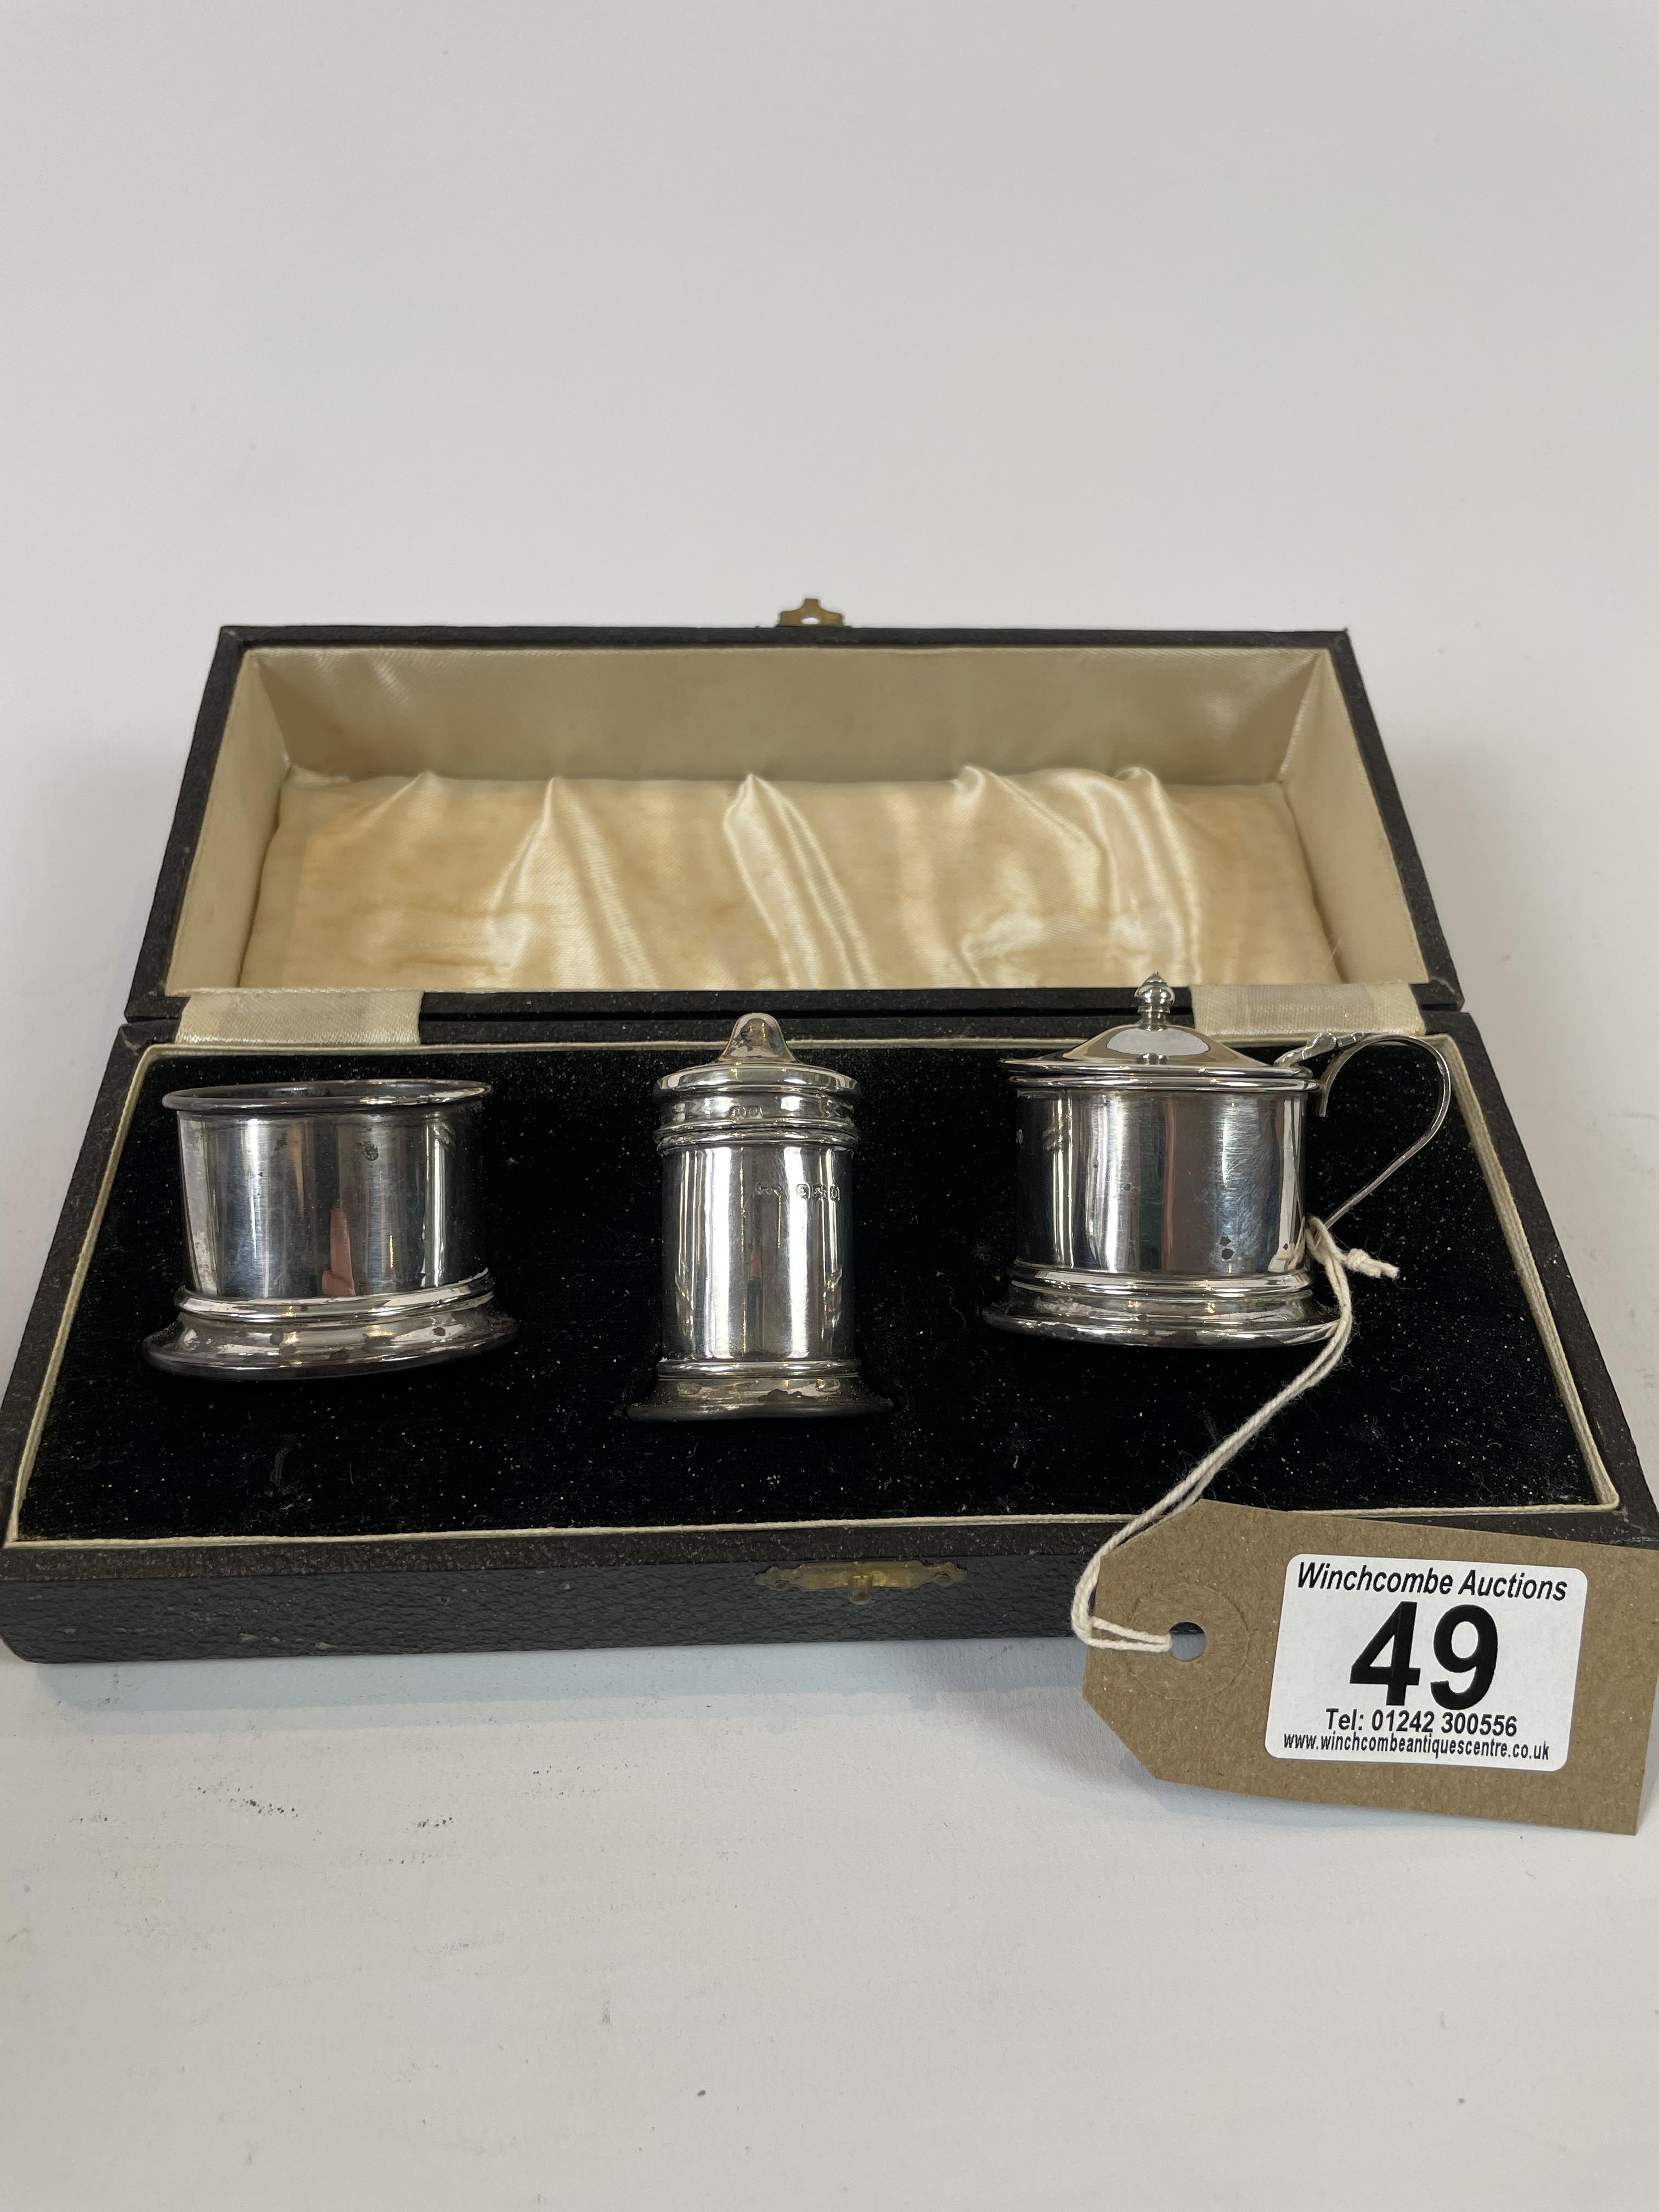 Boxed set of Silver Salts dated 1913